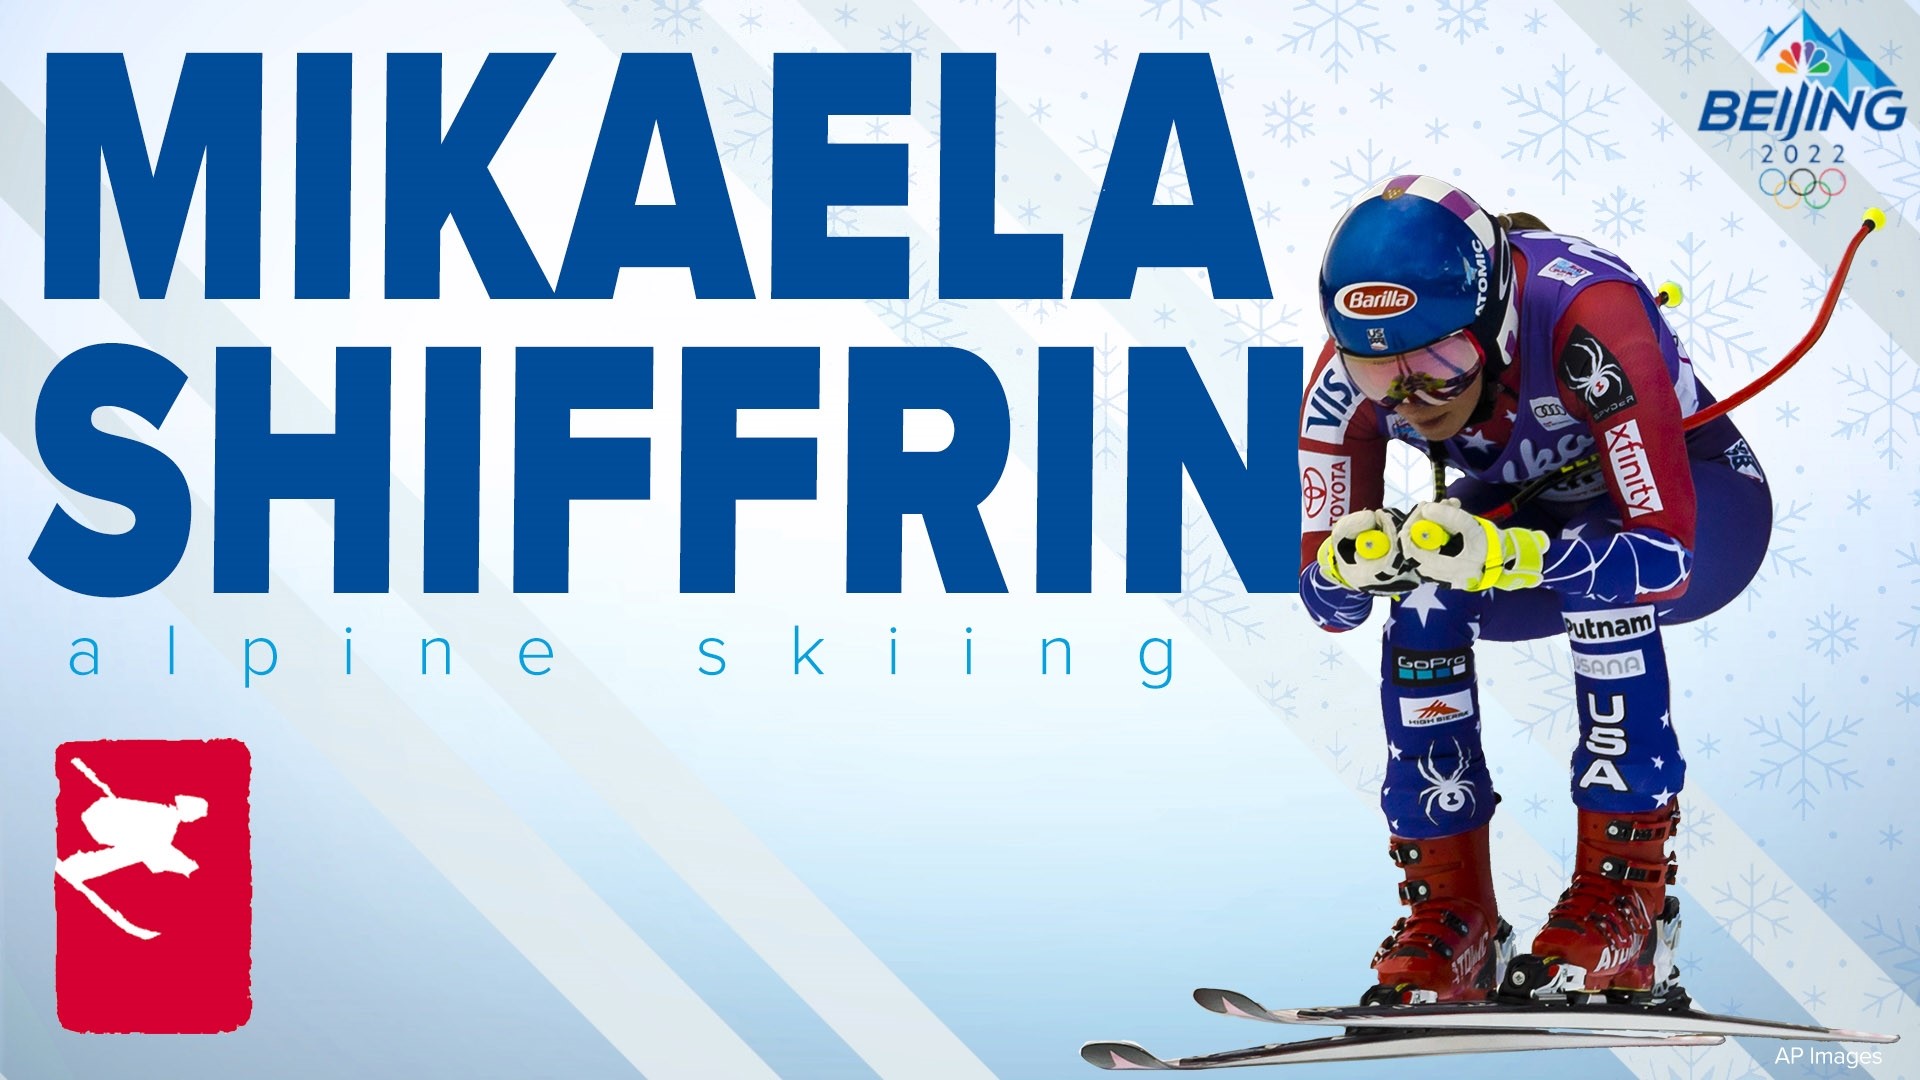 Olympians Mikaela Shiffrin and Breezy Johnson are not only teammates, but also good friends.